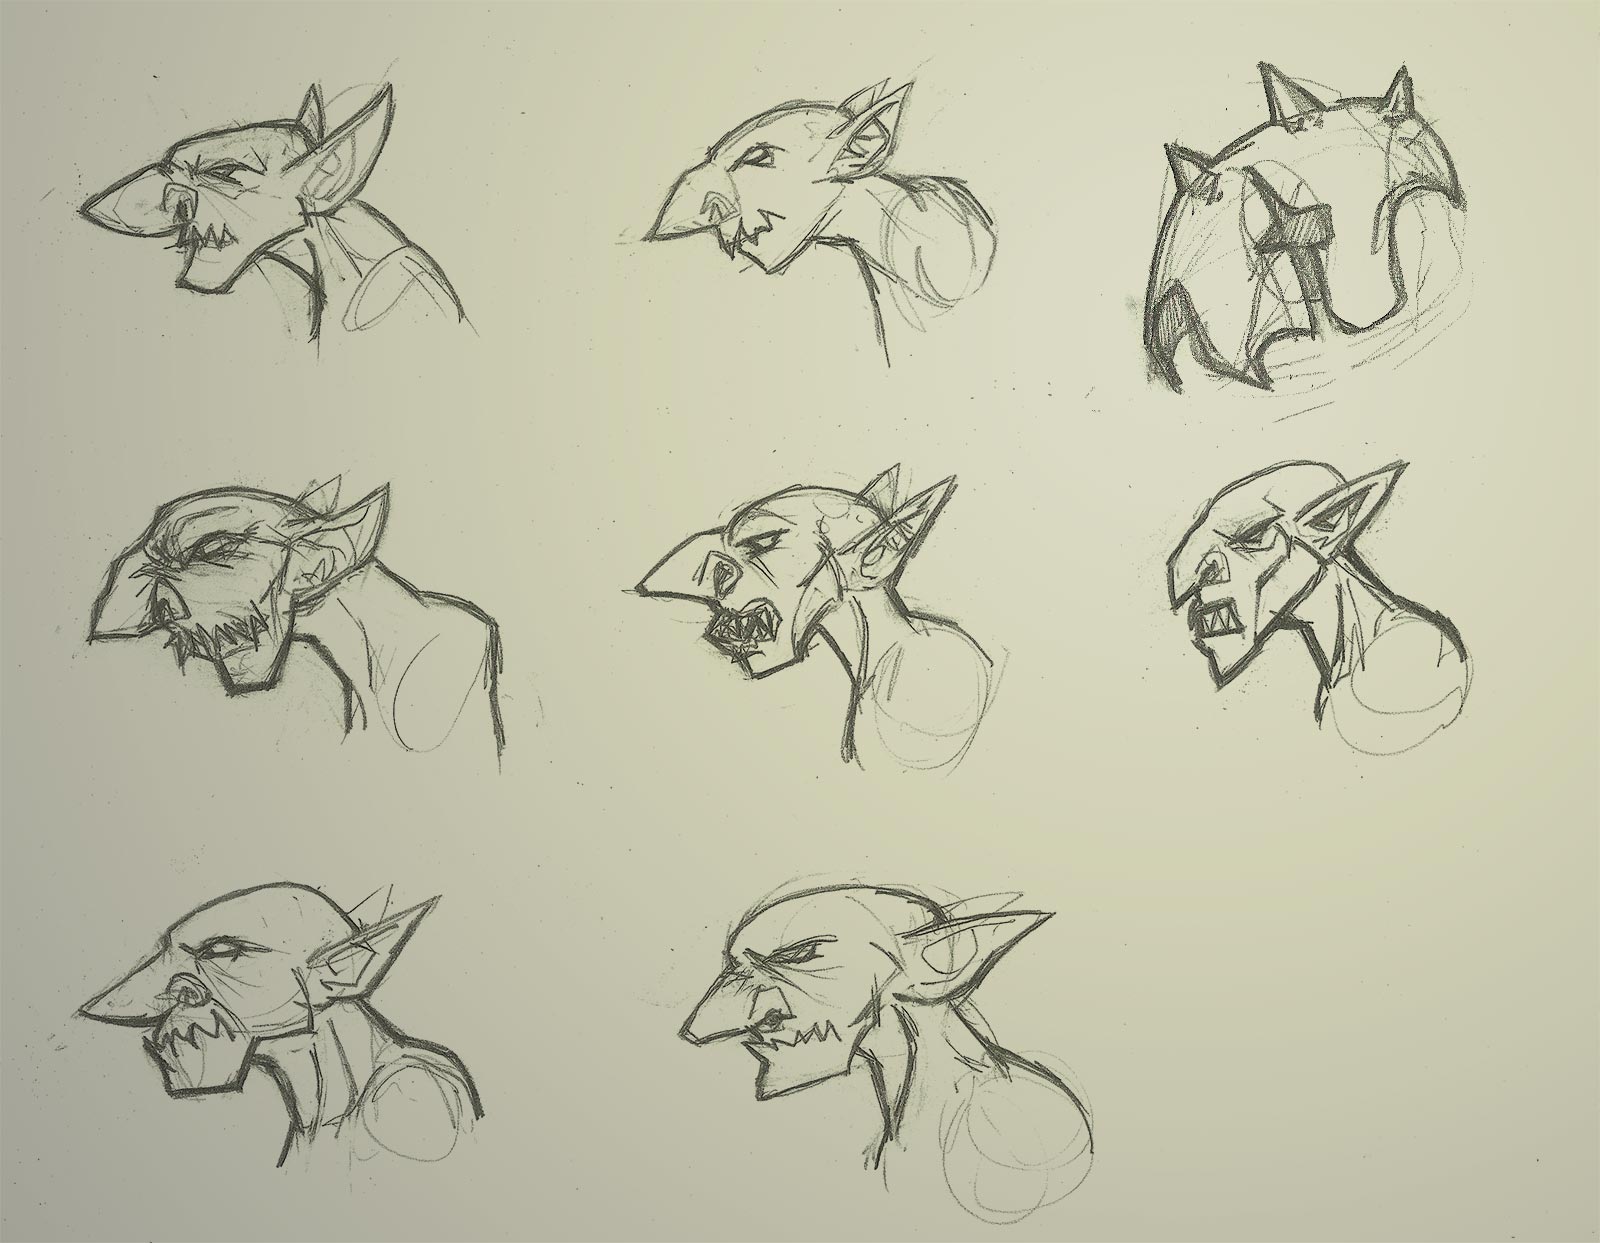 Goblin drawing reference